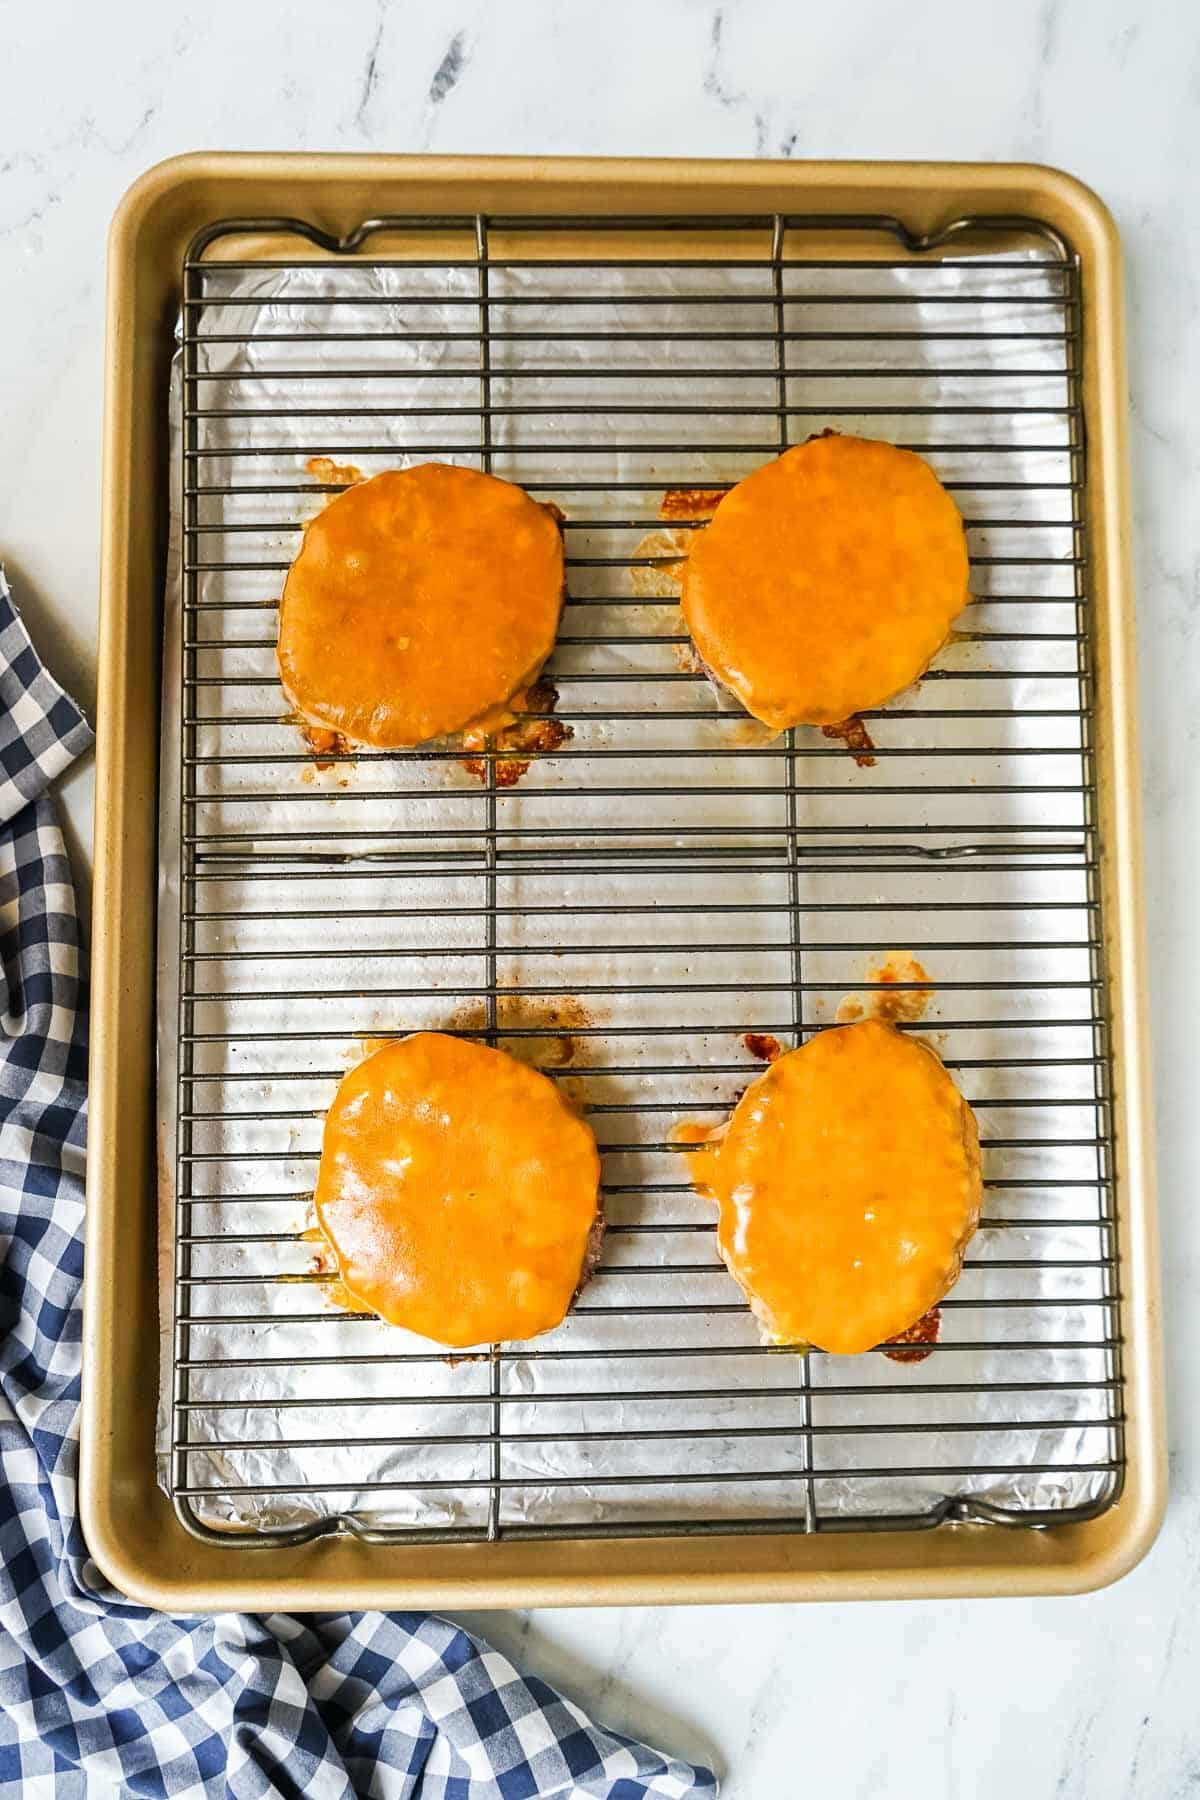 Cooked burgers with cheese on them.